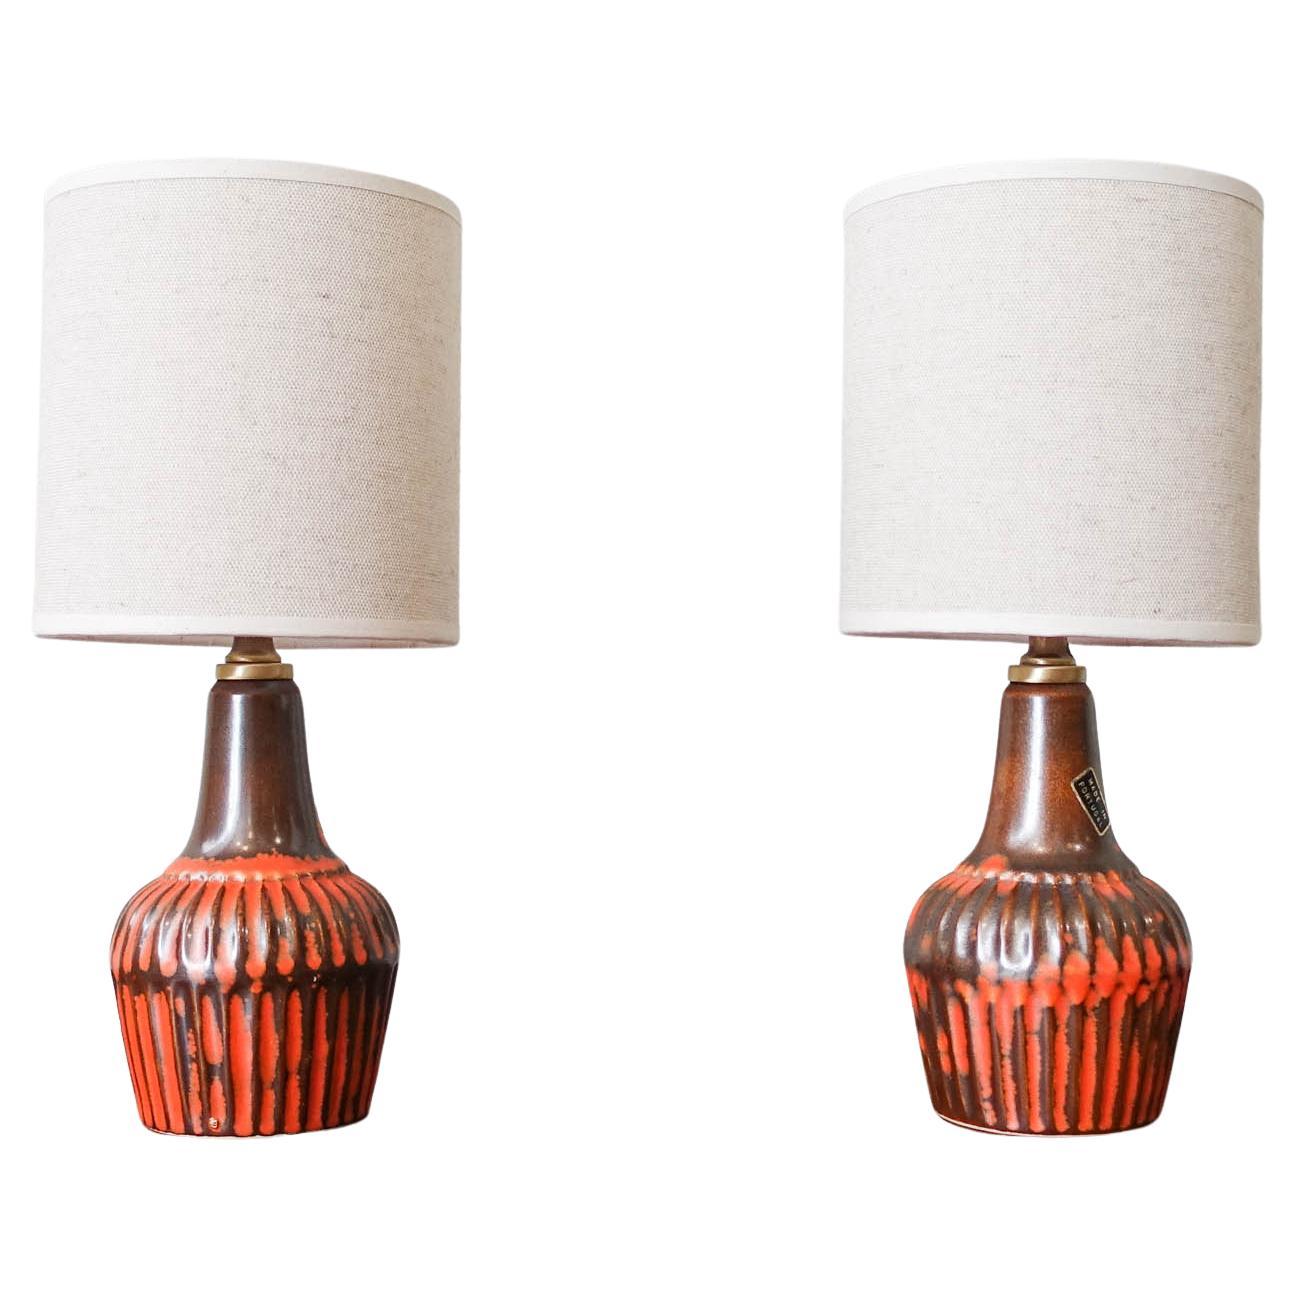 Pair of Brown and Orange Ceramic Table Lamps by Secla, 1960s For Sale